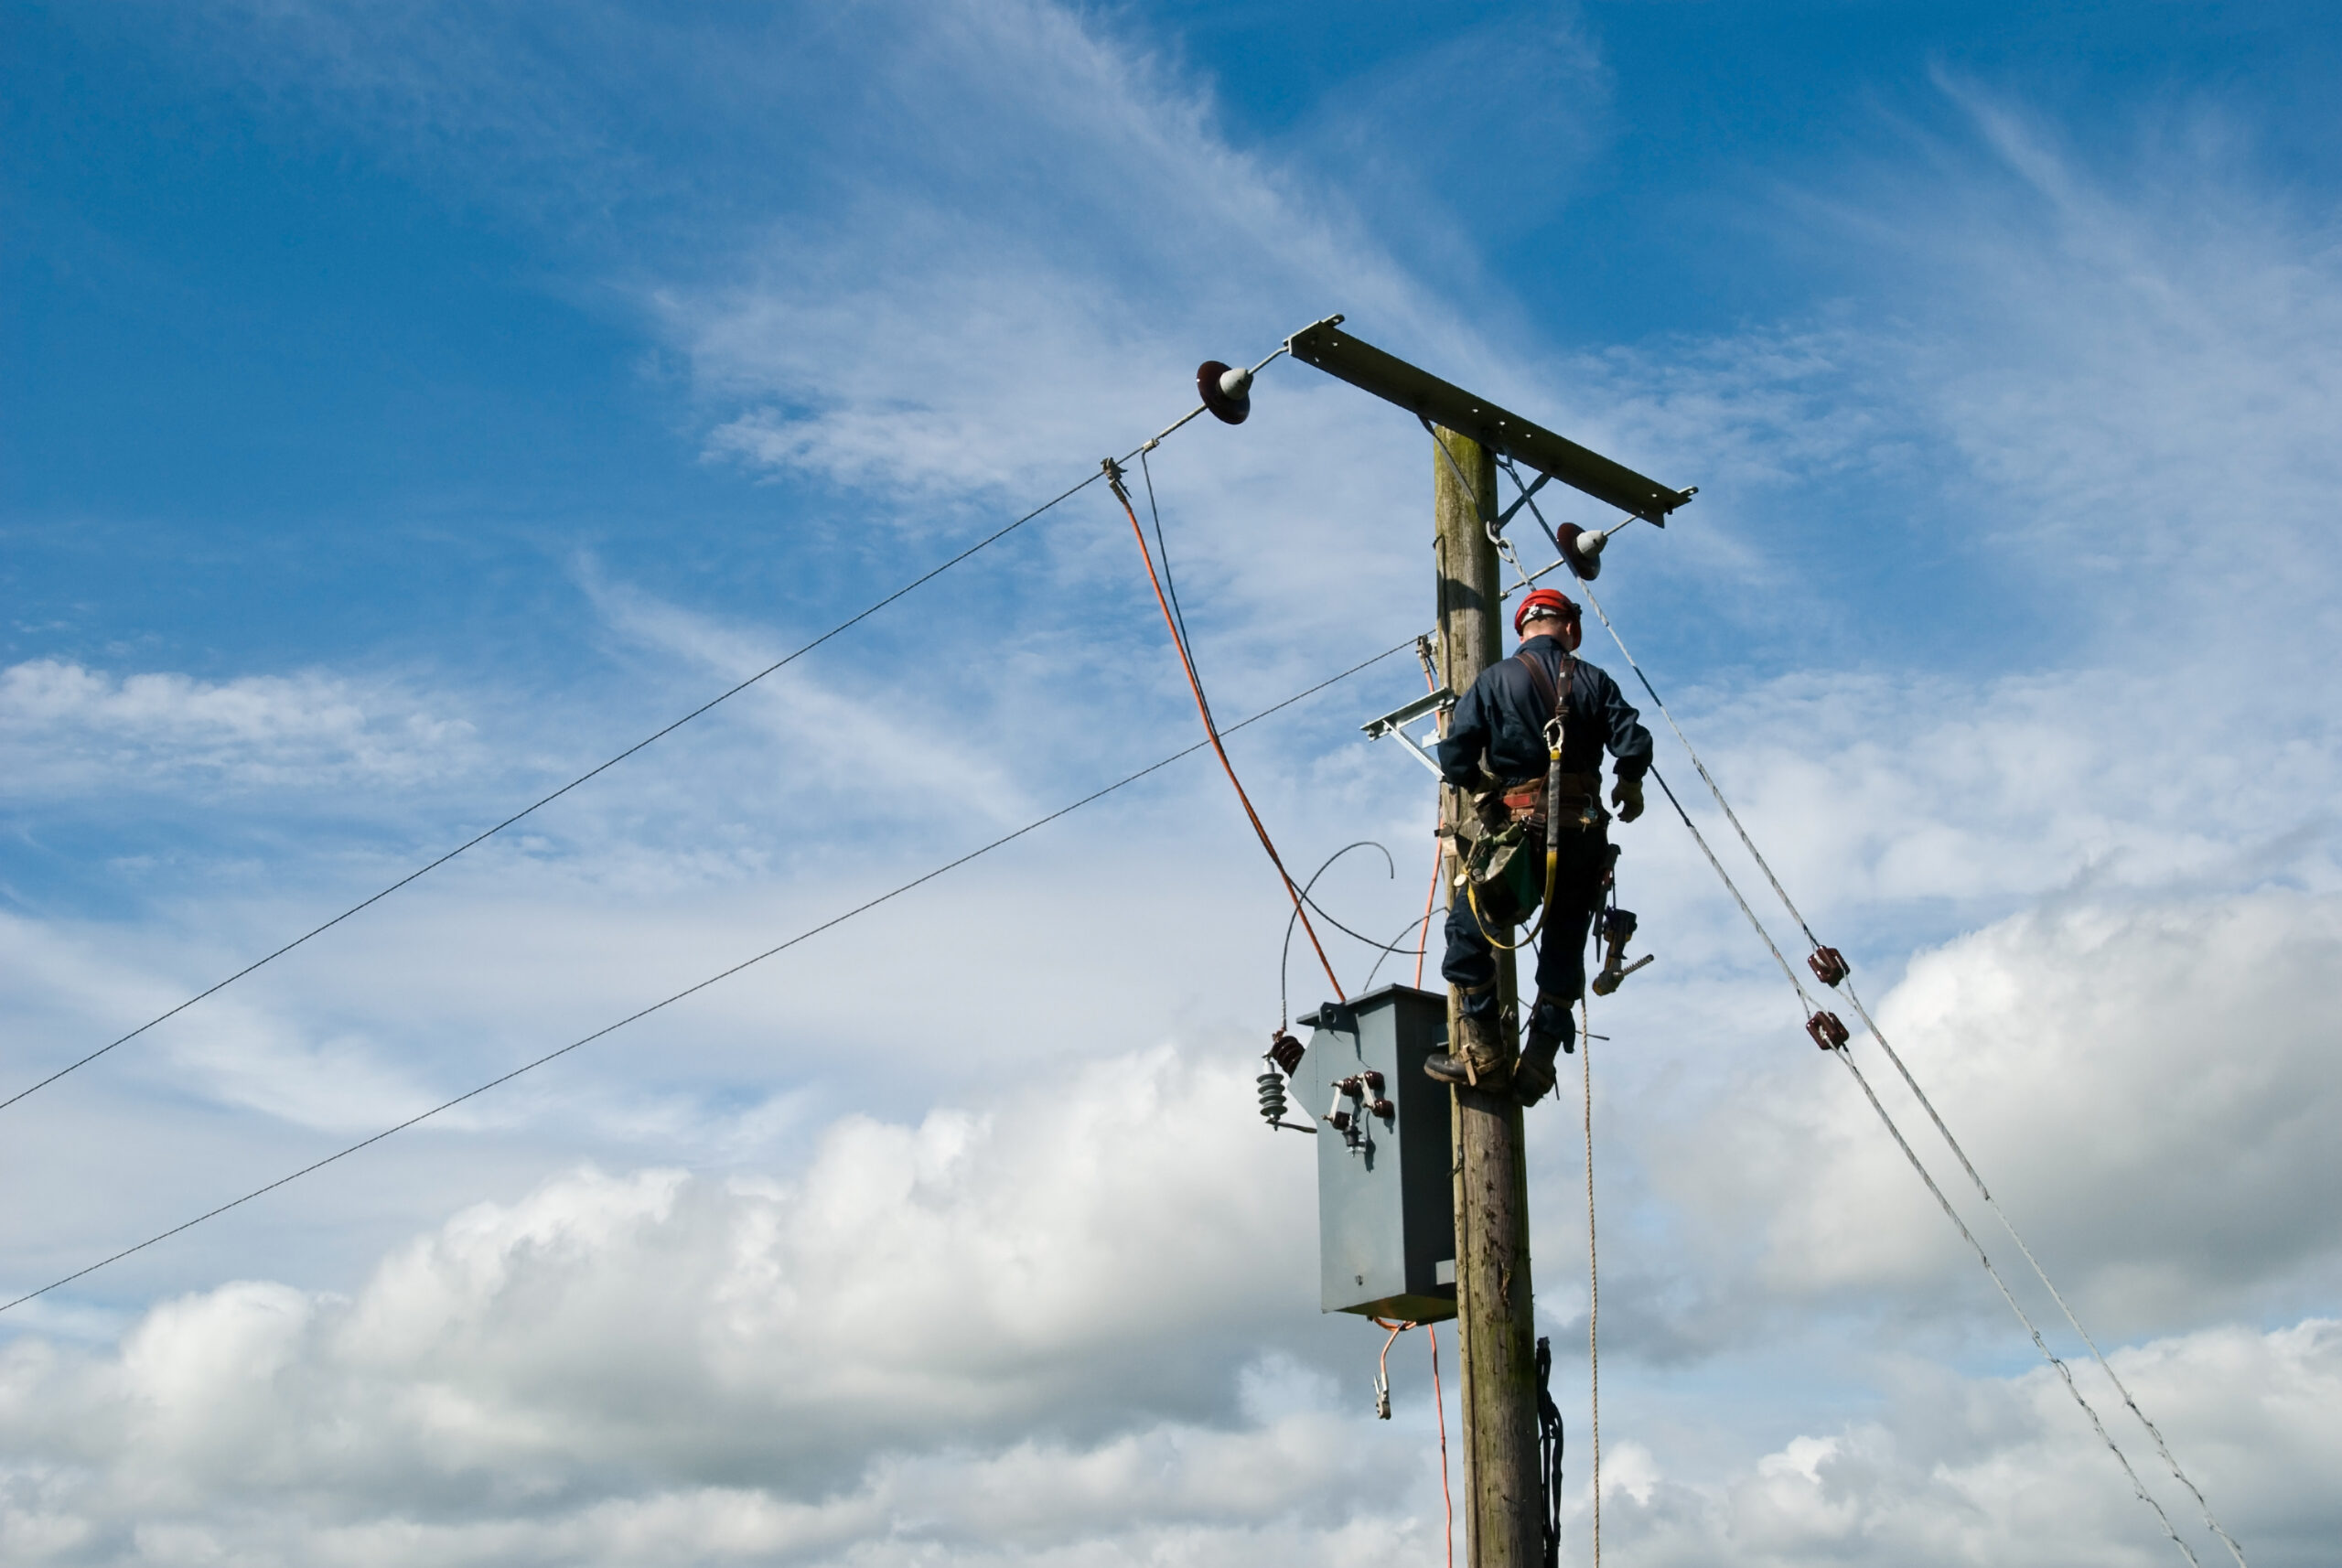 Card Thumbnail - How to Become an Electrical Lineman